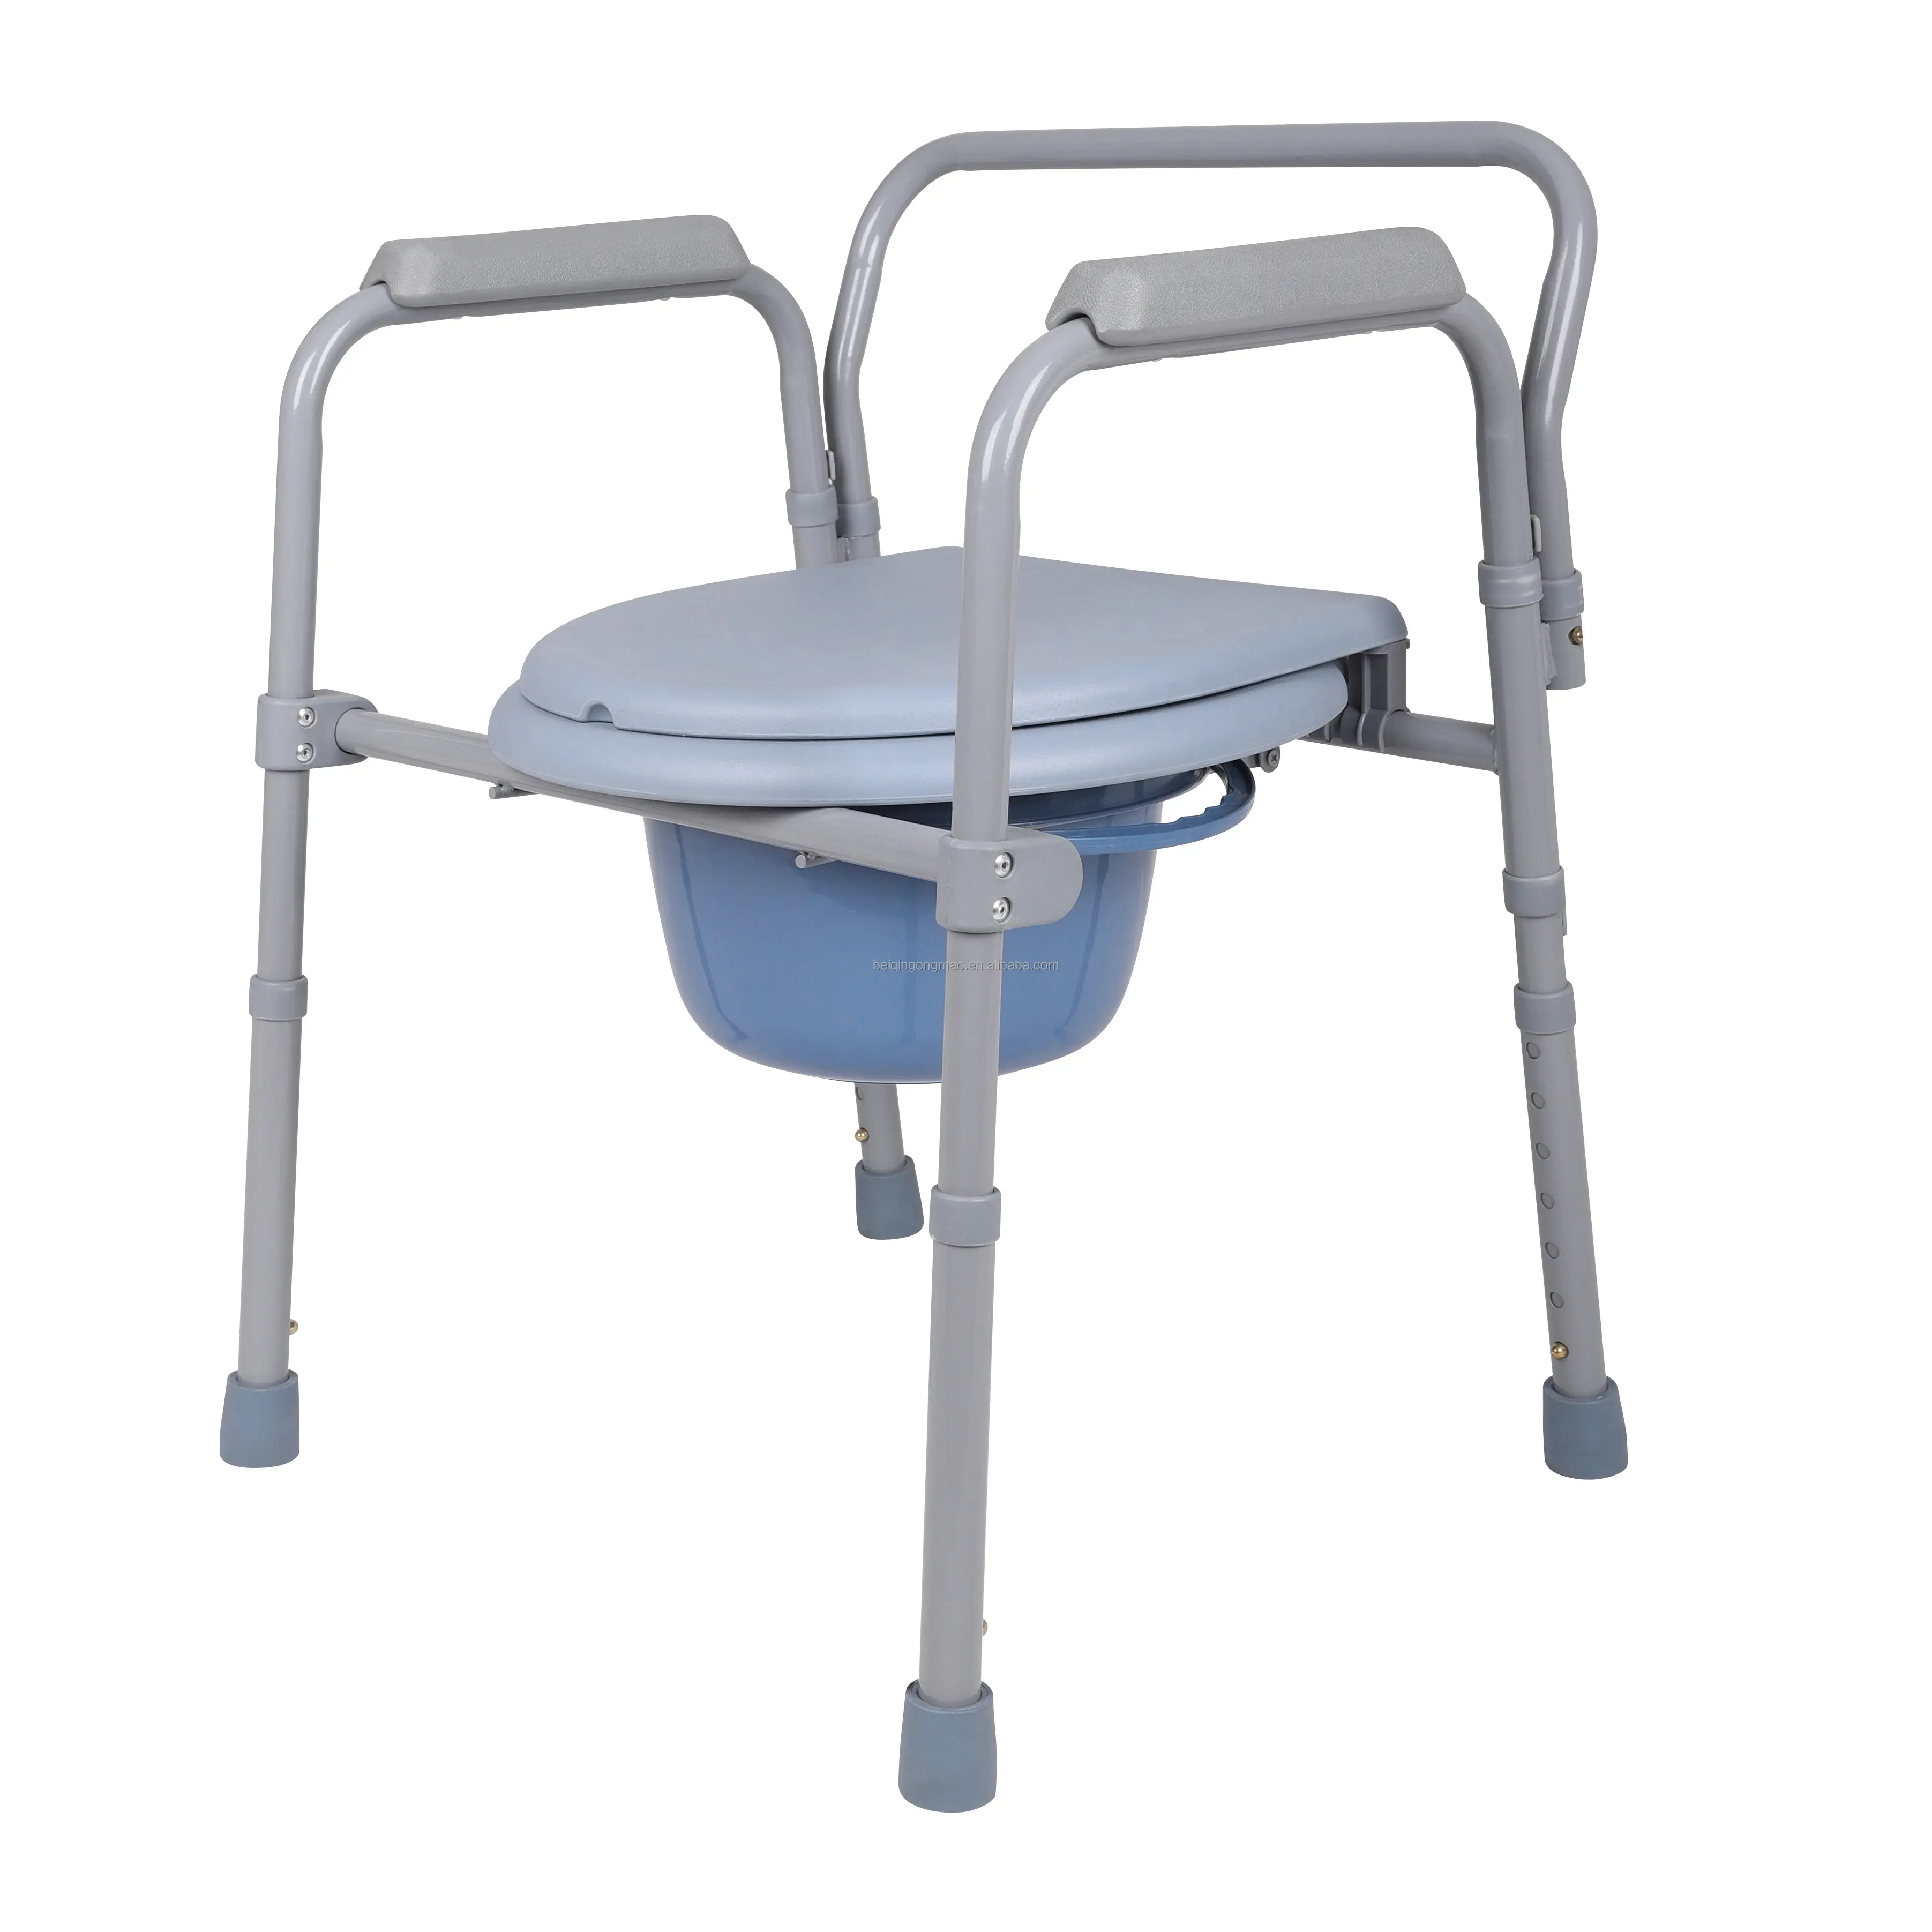 Medical hospital portable height adjustable easy clean steel wheels seat shower toilet commode chair for elderly